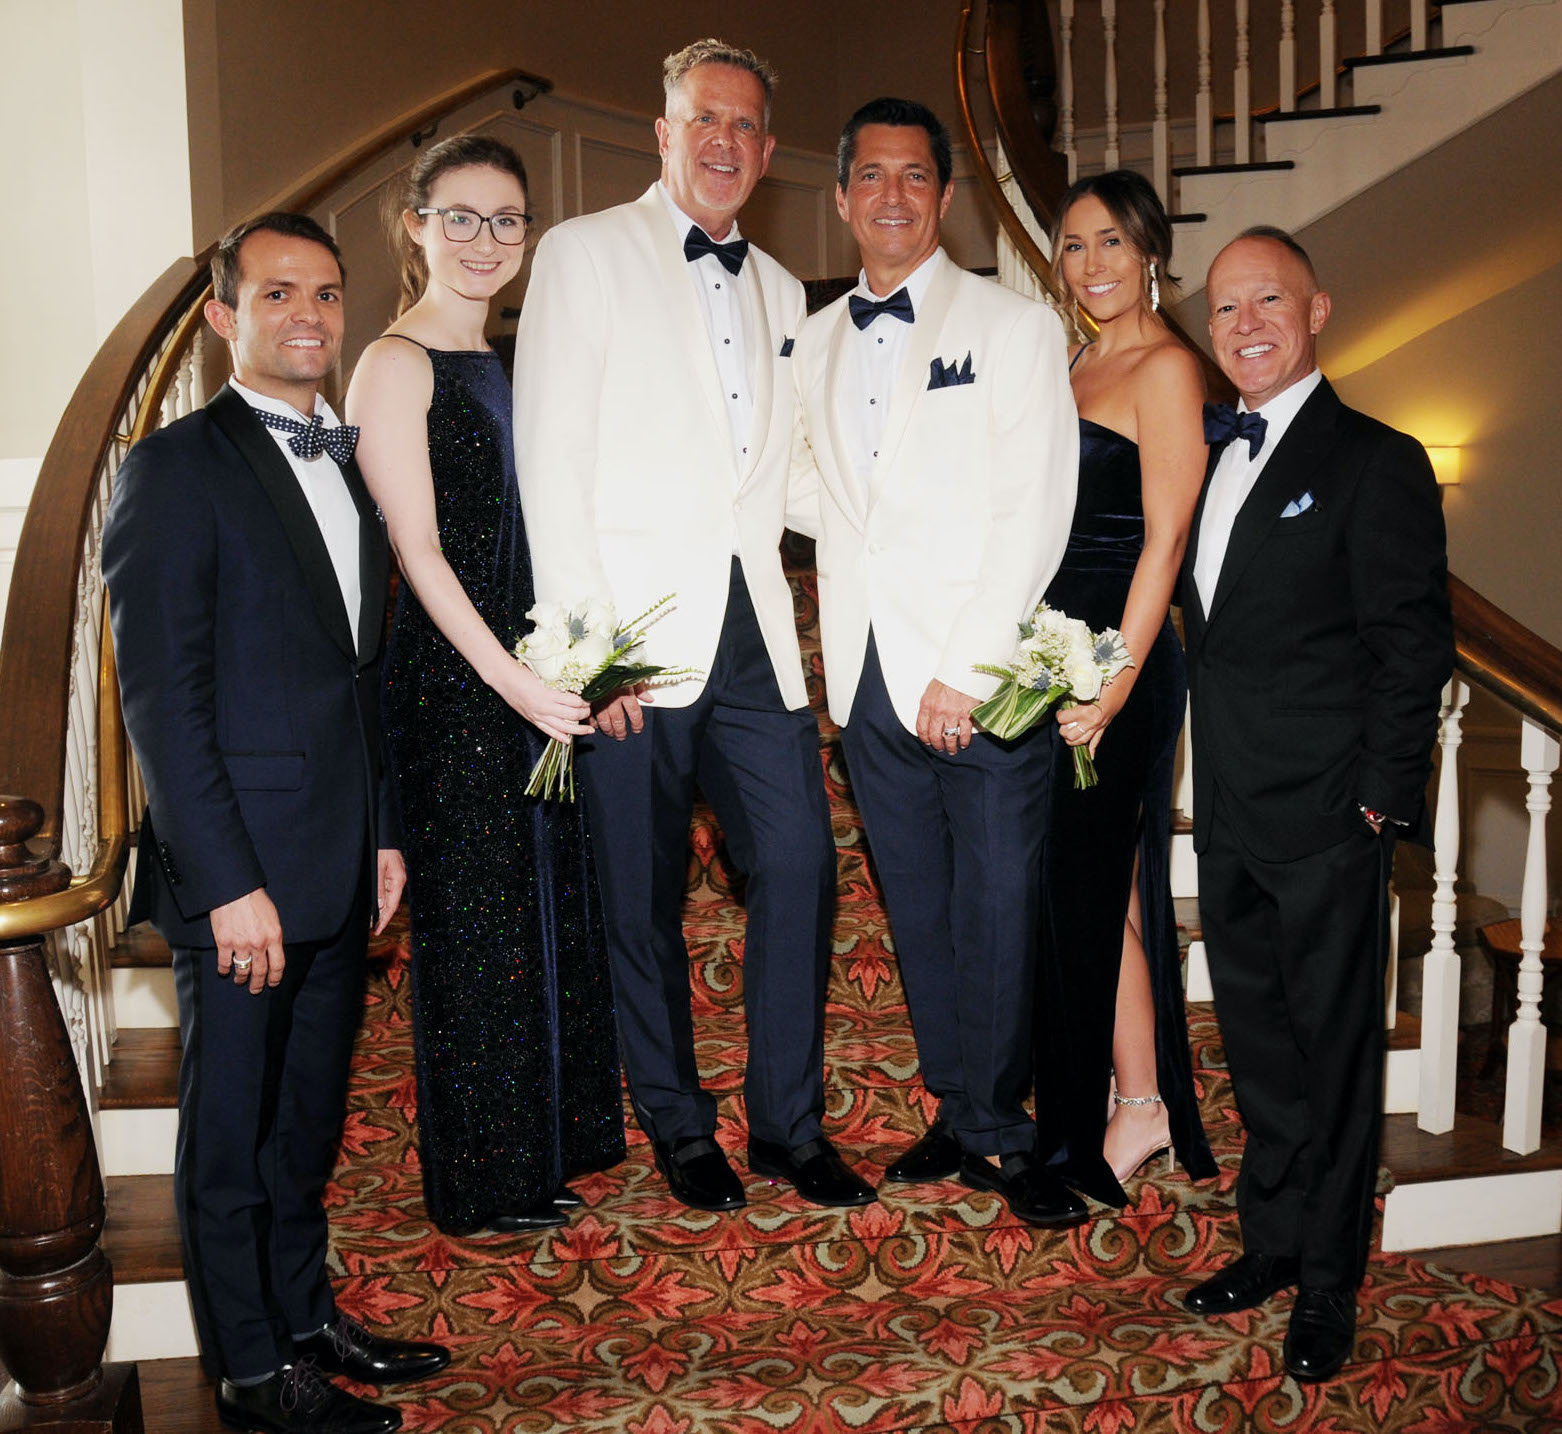 A groom and groom smile with their family members at their wedding ceremony in Galveston, TX.